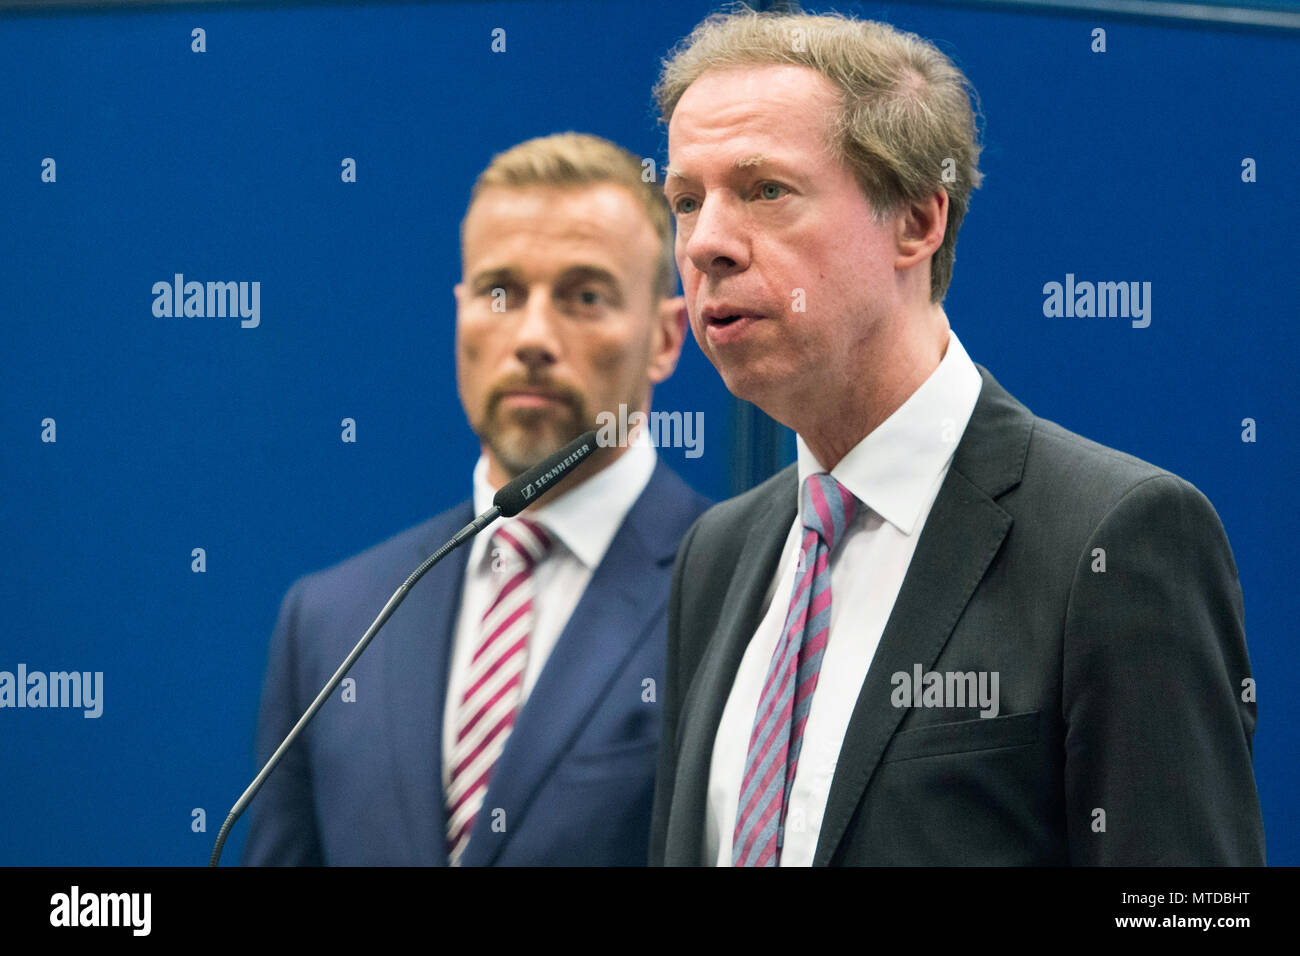 29 May 2018, Germany, Hamburg: Michael Elsner, senior public prosecutor,  delivers a statement next to Jan Hieber, head of the special commission  'Schwarzer Block' (lit. black block), during a press conference in